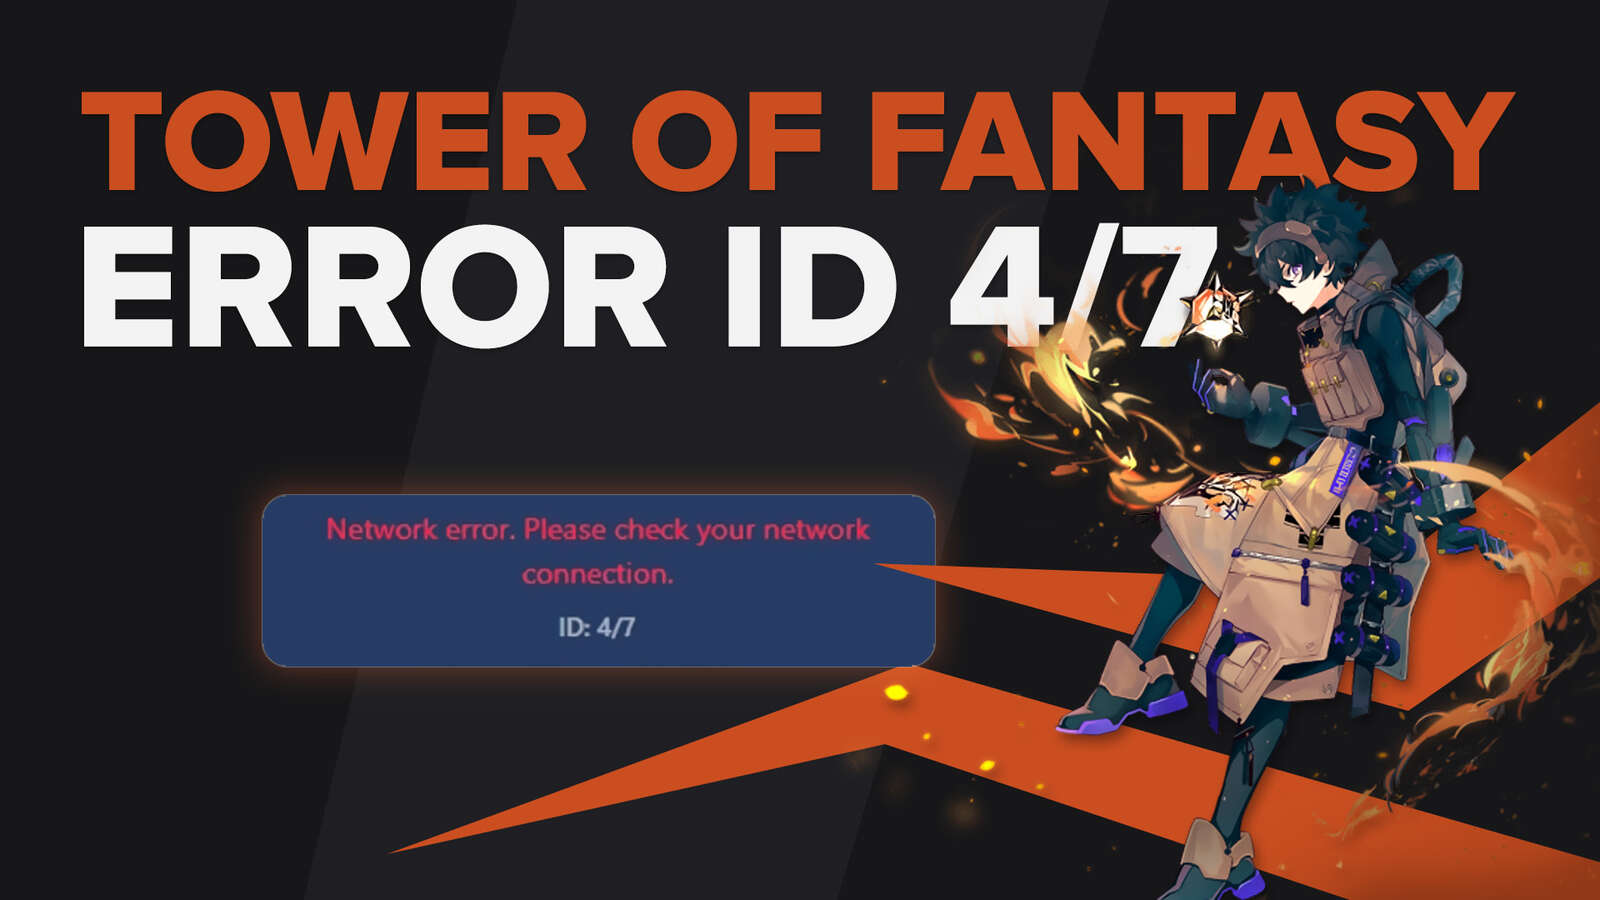 How to Fix Tower of Fantasy Network Error ID 4/7